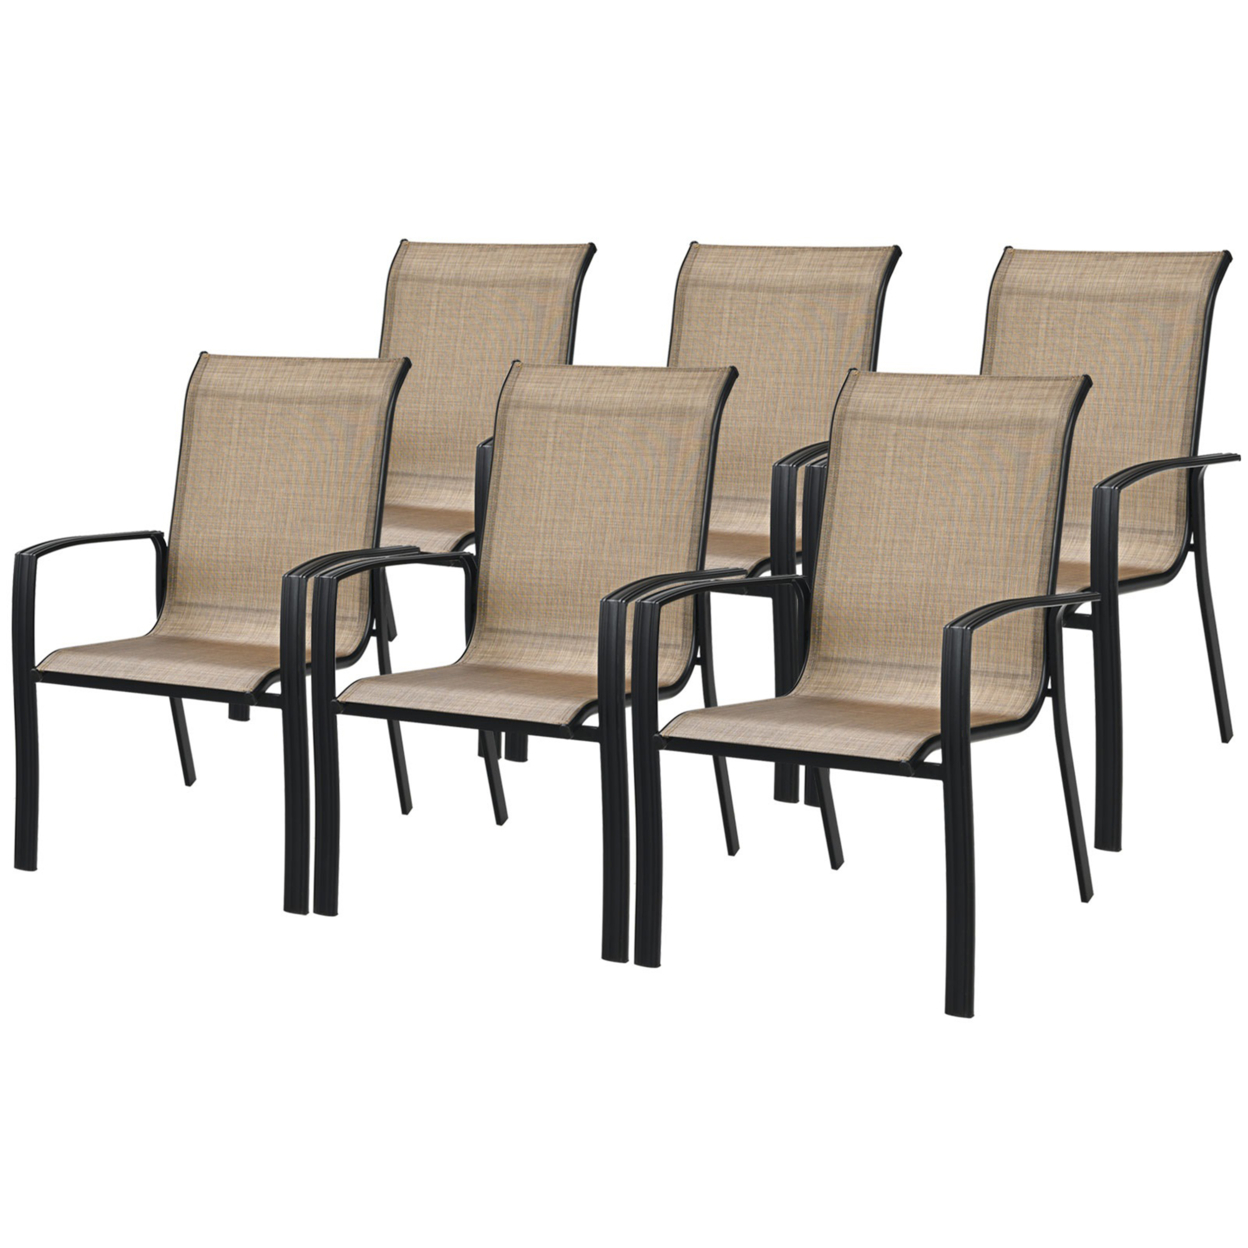 Outdoor Stackable Dining Chair Patio Armchair W/ Breathable Fabric - Brown, 20 Pcs